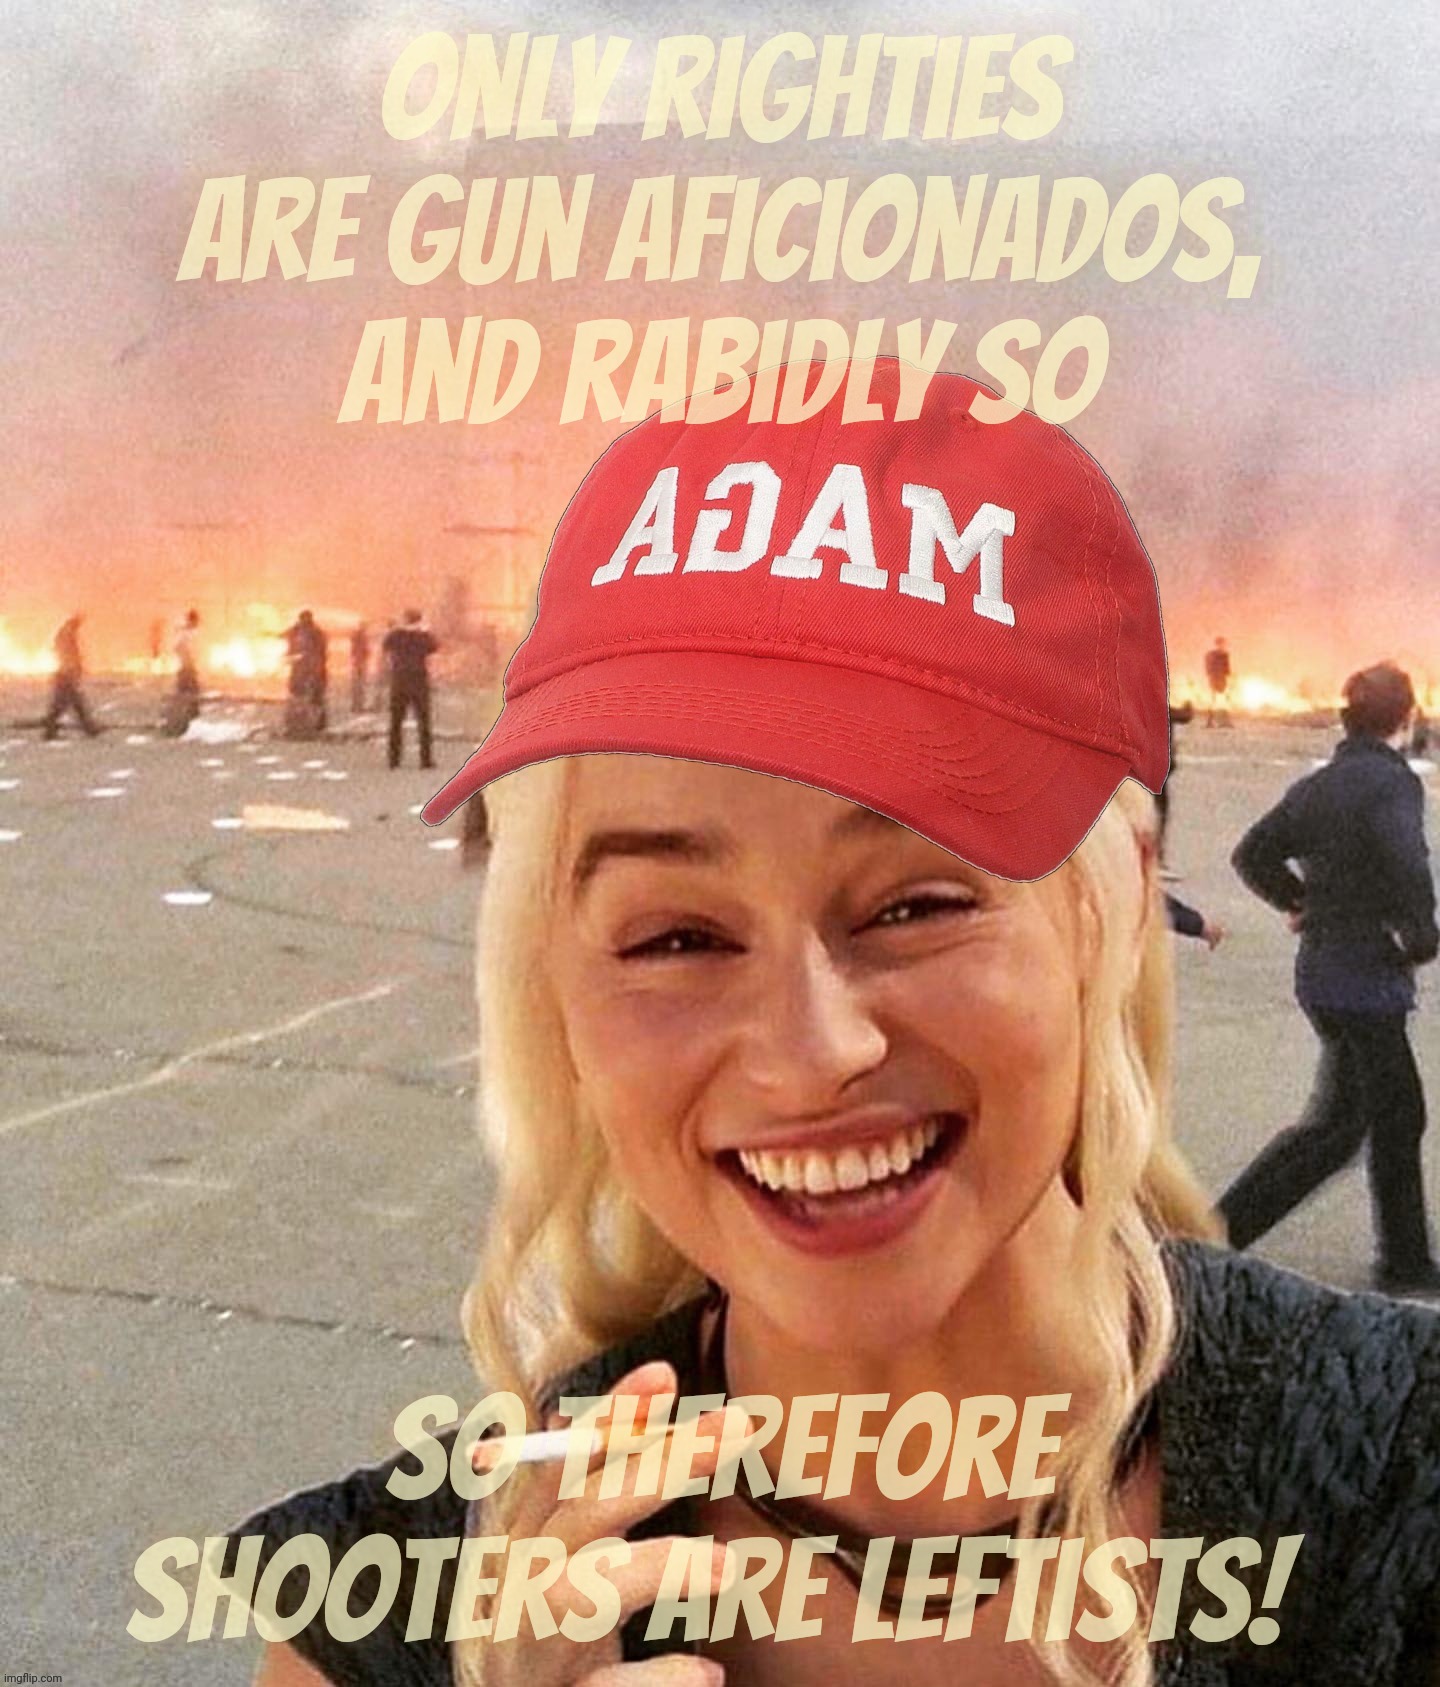 Reich Wing logic: Only they know the Right way to kill and lust for blood, so therefore they're innocent of any shootings, derp | Only Righties are gun aficionados, and rabidly so; So therefore shooters are leftists! | image tagged in disaster smoker girl maga edition,reich wing,right wing shooters,2a assassins,gun fetishers,the earlobe assassin | made w/ Imgflip meme maker